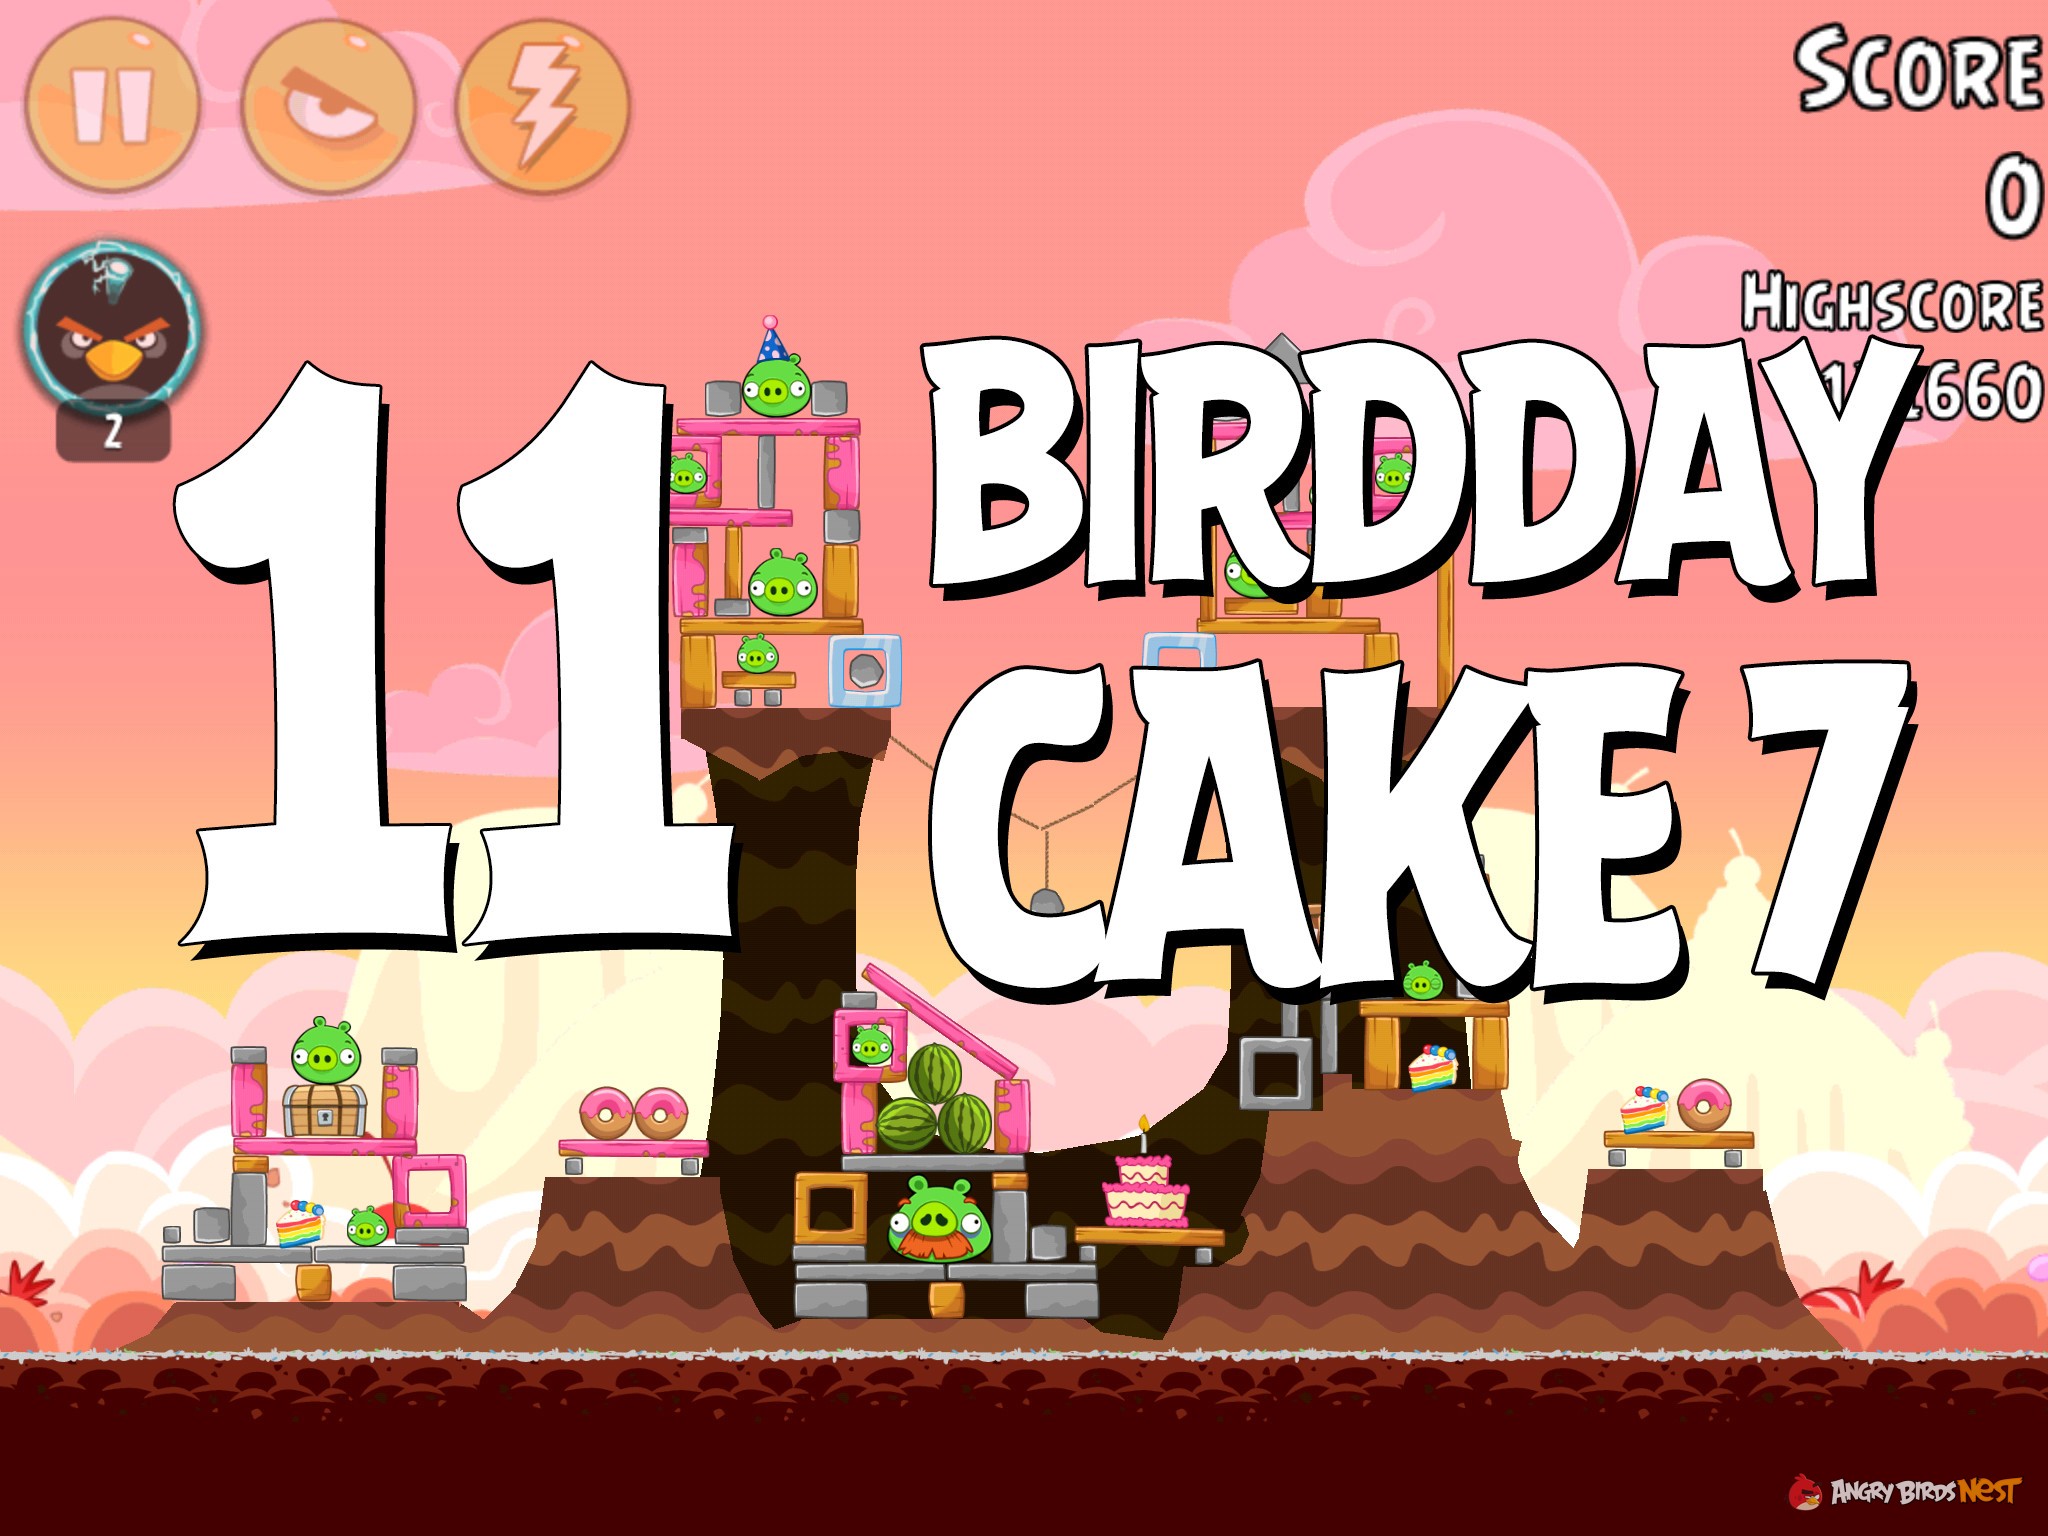 Angry-Birds-Birdday-Party-Cake-7-Level-11